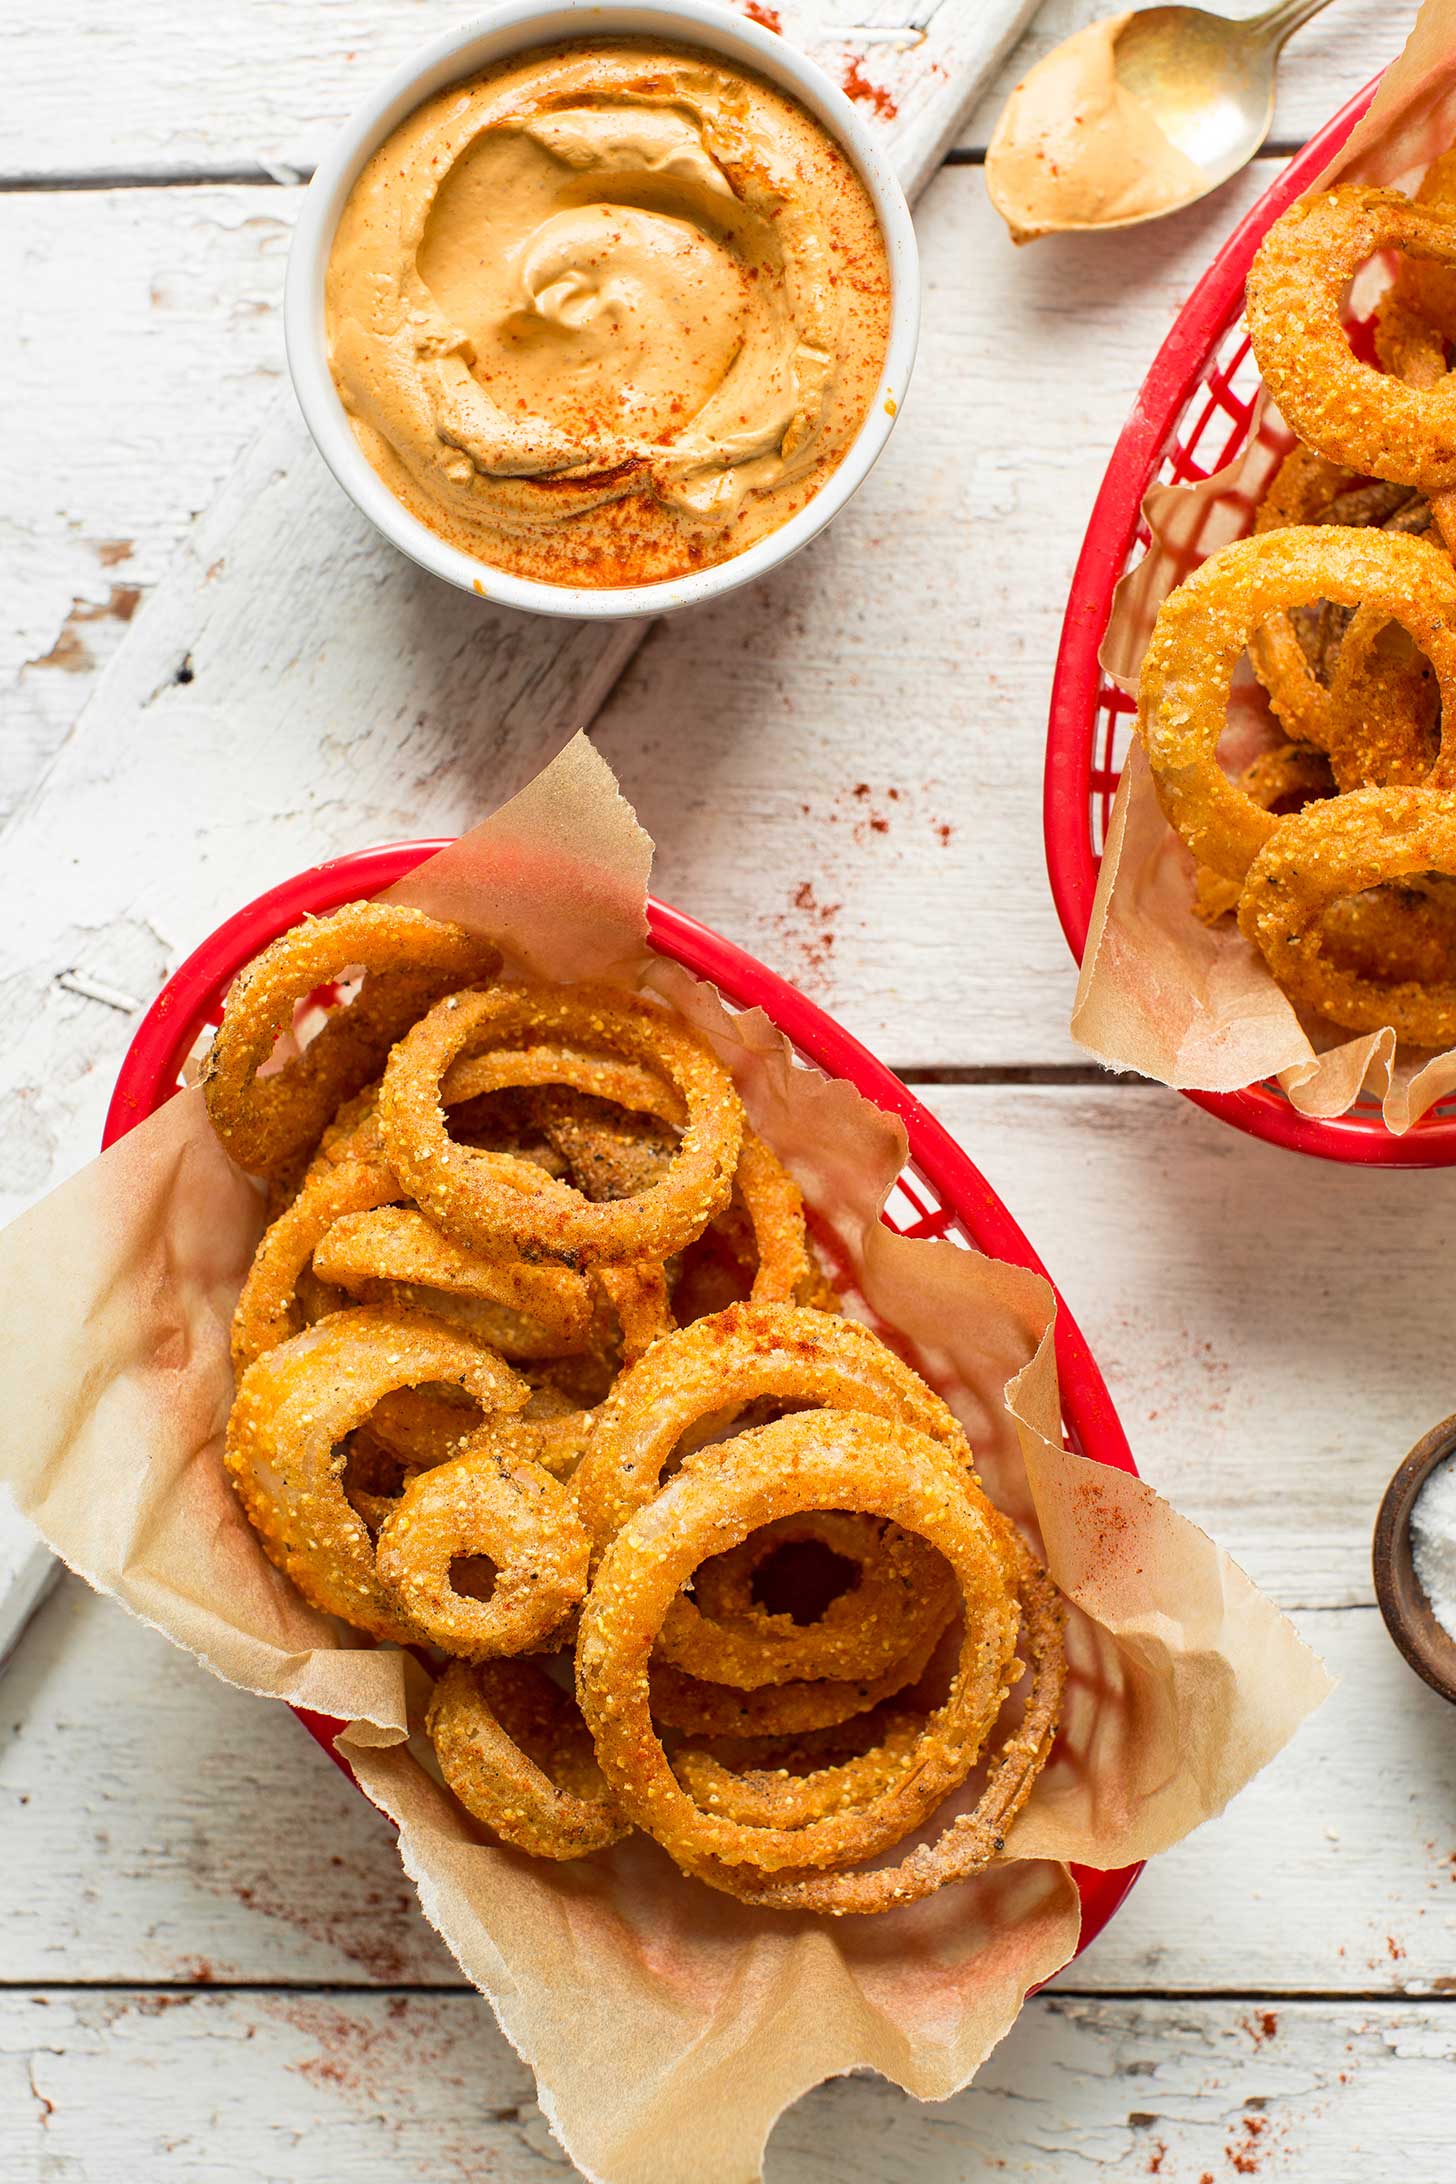 EASY Gluten-Free Onions Rings Crispy #savory #spicy PERFECT for dipping in my Vegan Chipotle Aioli #plantbased #vegan #glutenfree #recipe